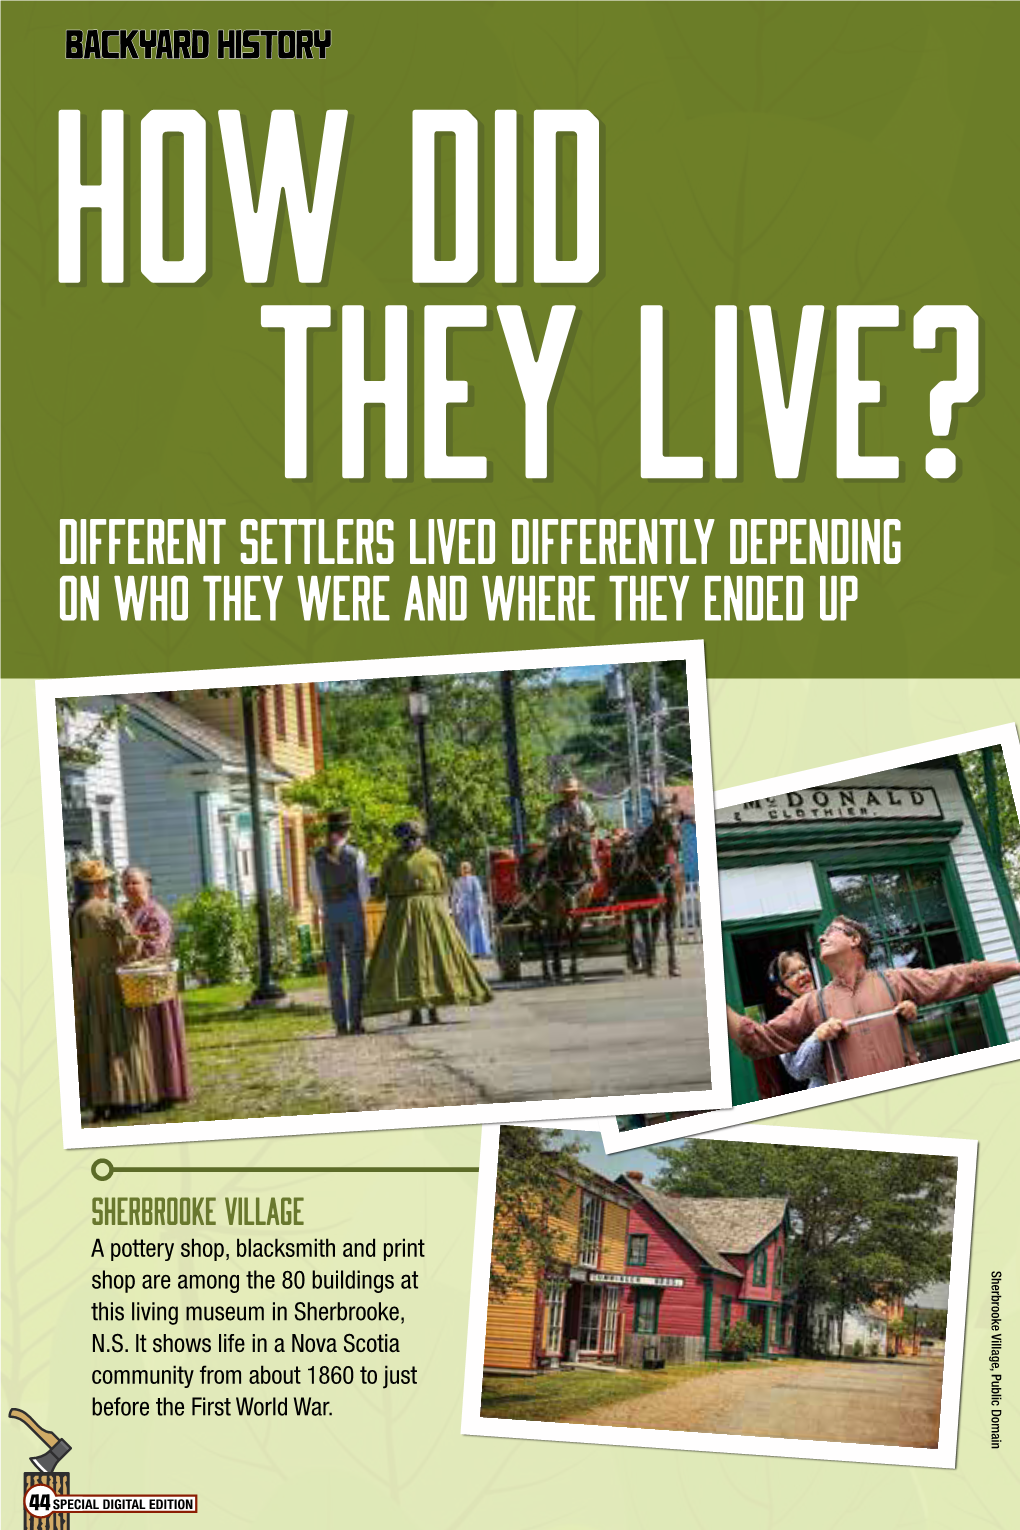 Different Settlers Lived Differently Depending on Who They Were and Where They Ended Up